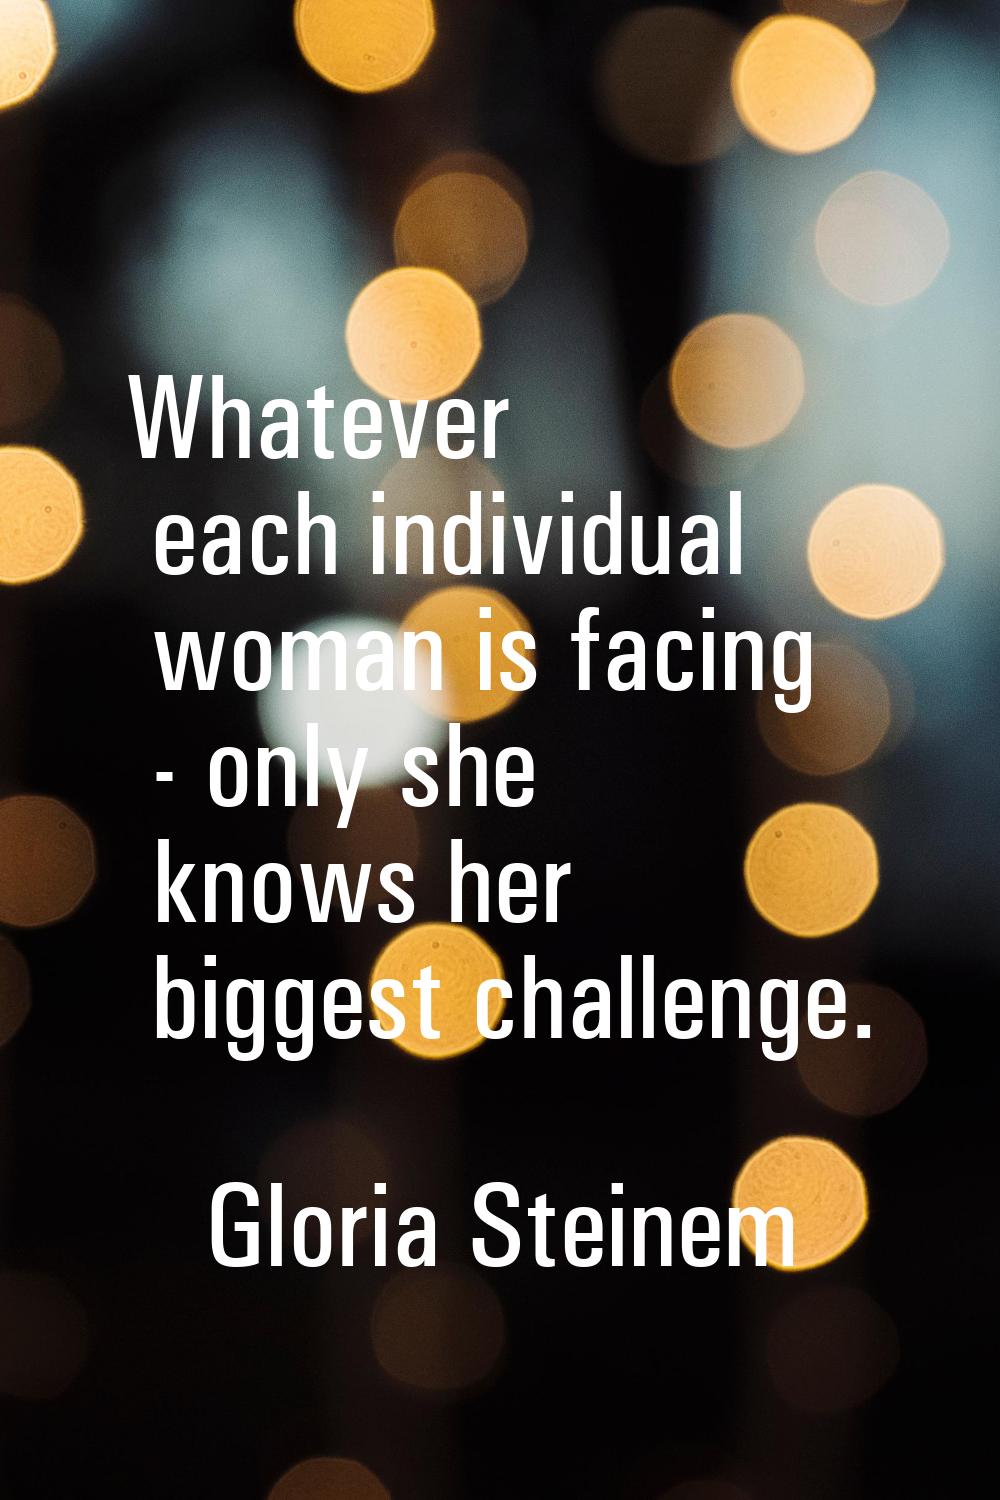 Whatever each individual woman is facing - only she knows her biggest challenge.